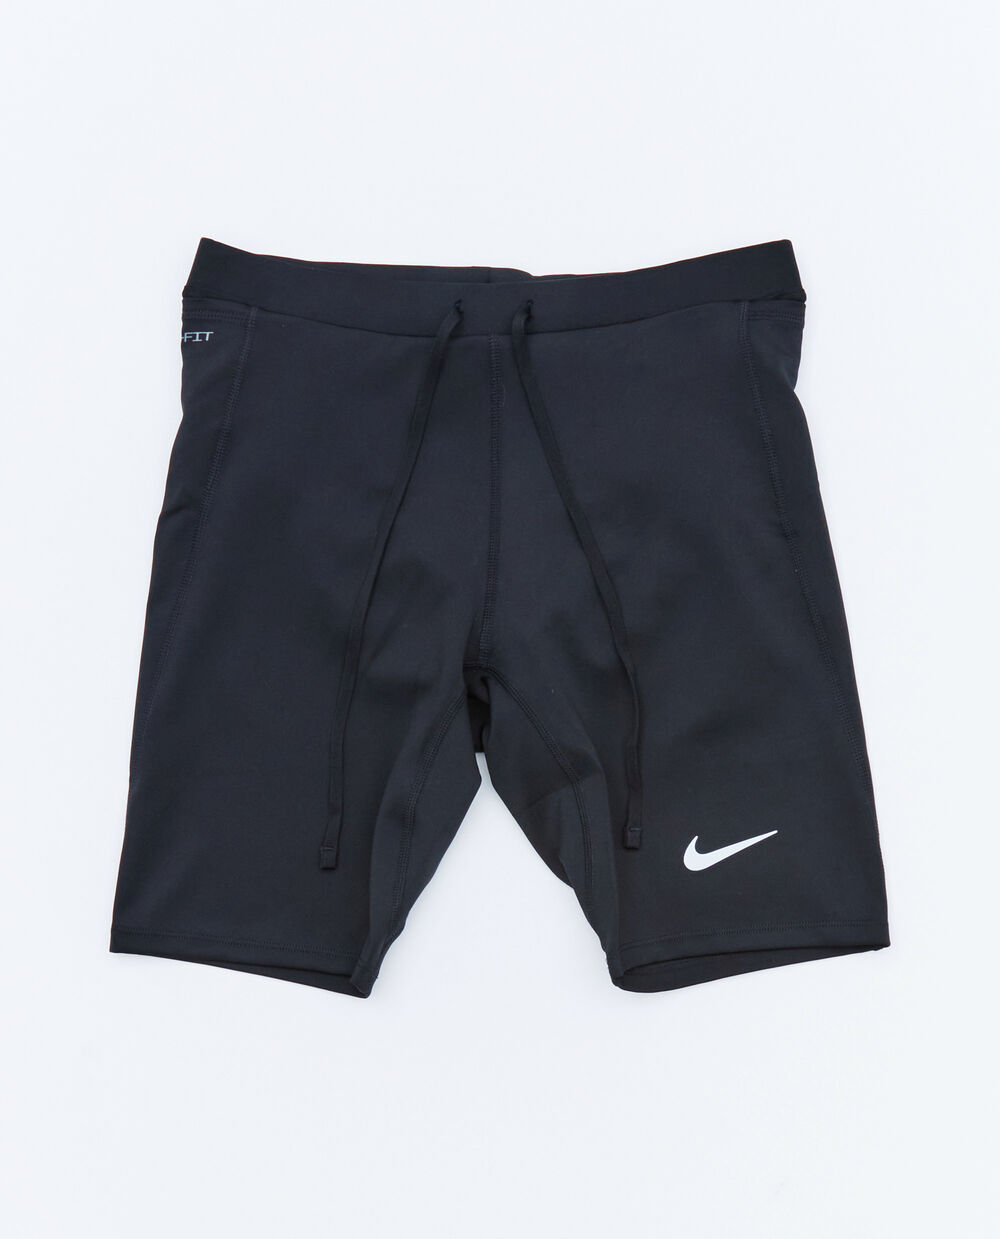 NIKE M FAST BRIEF-LINED RUNNING 1/2 TIGHTS